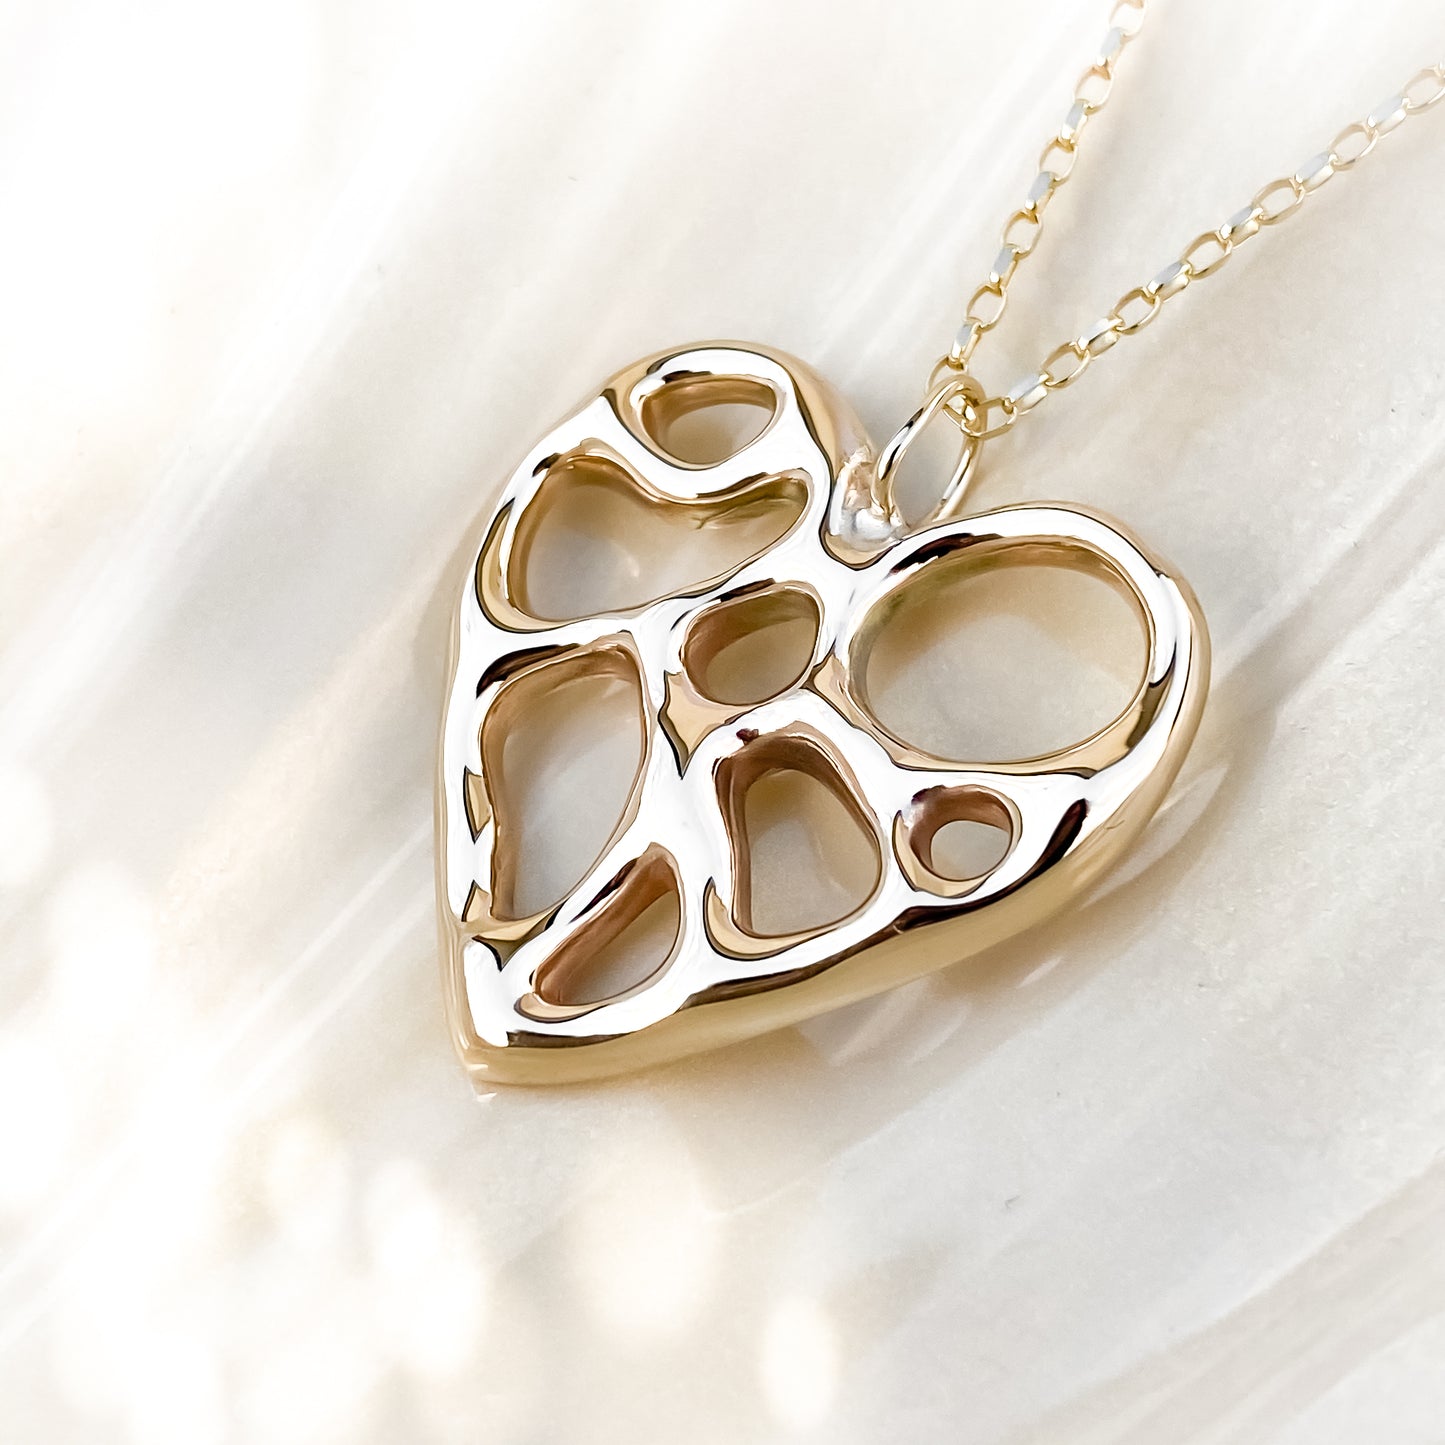 Gold Infinity Heart Necklace